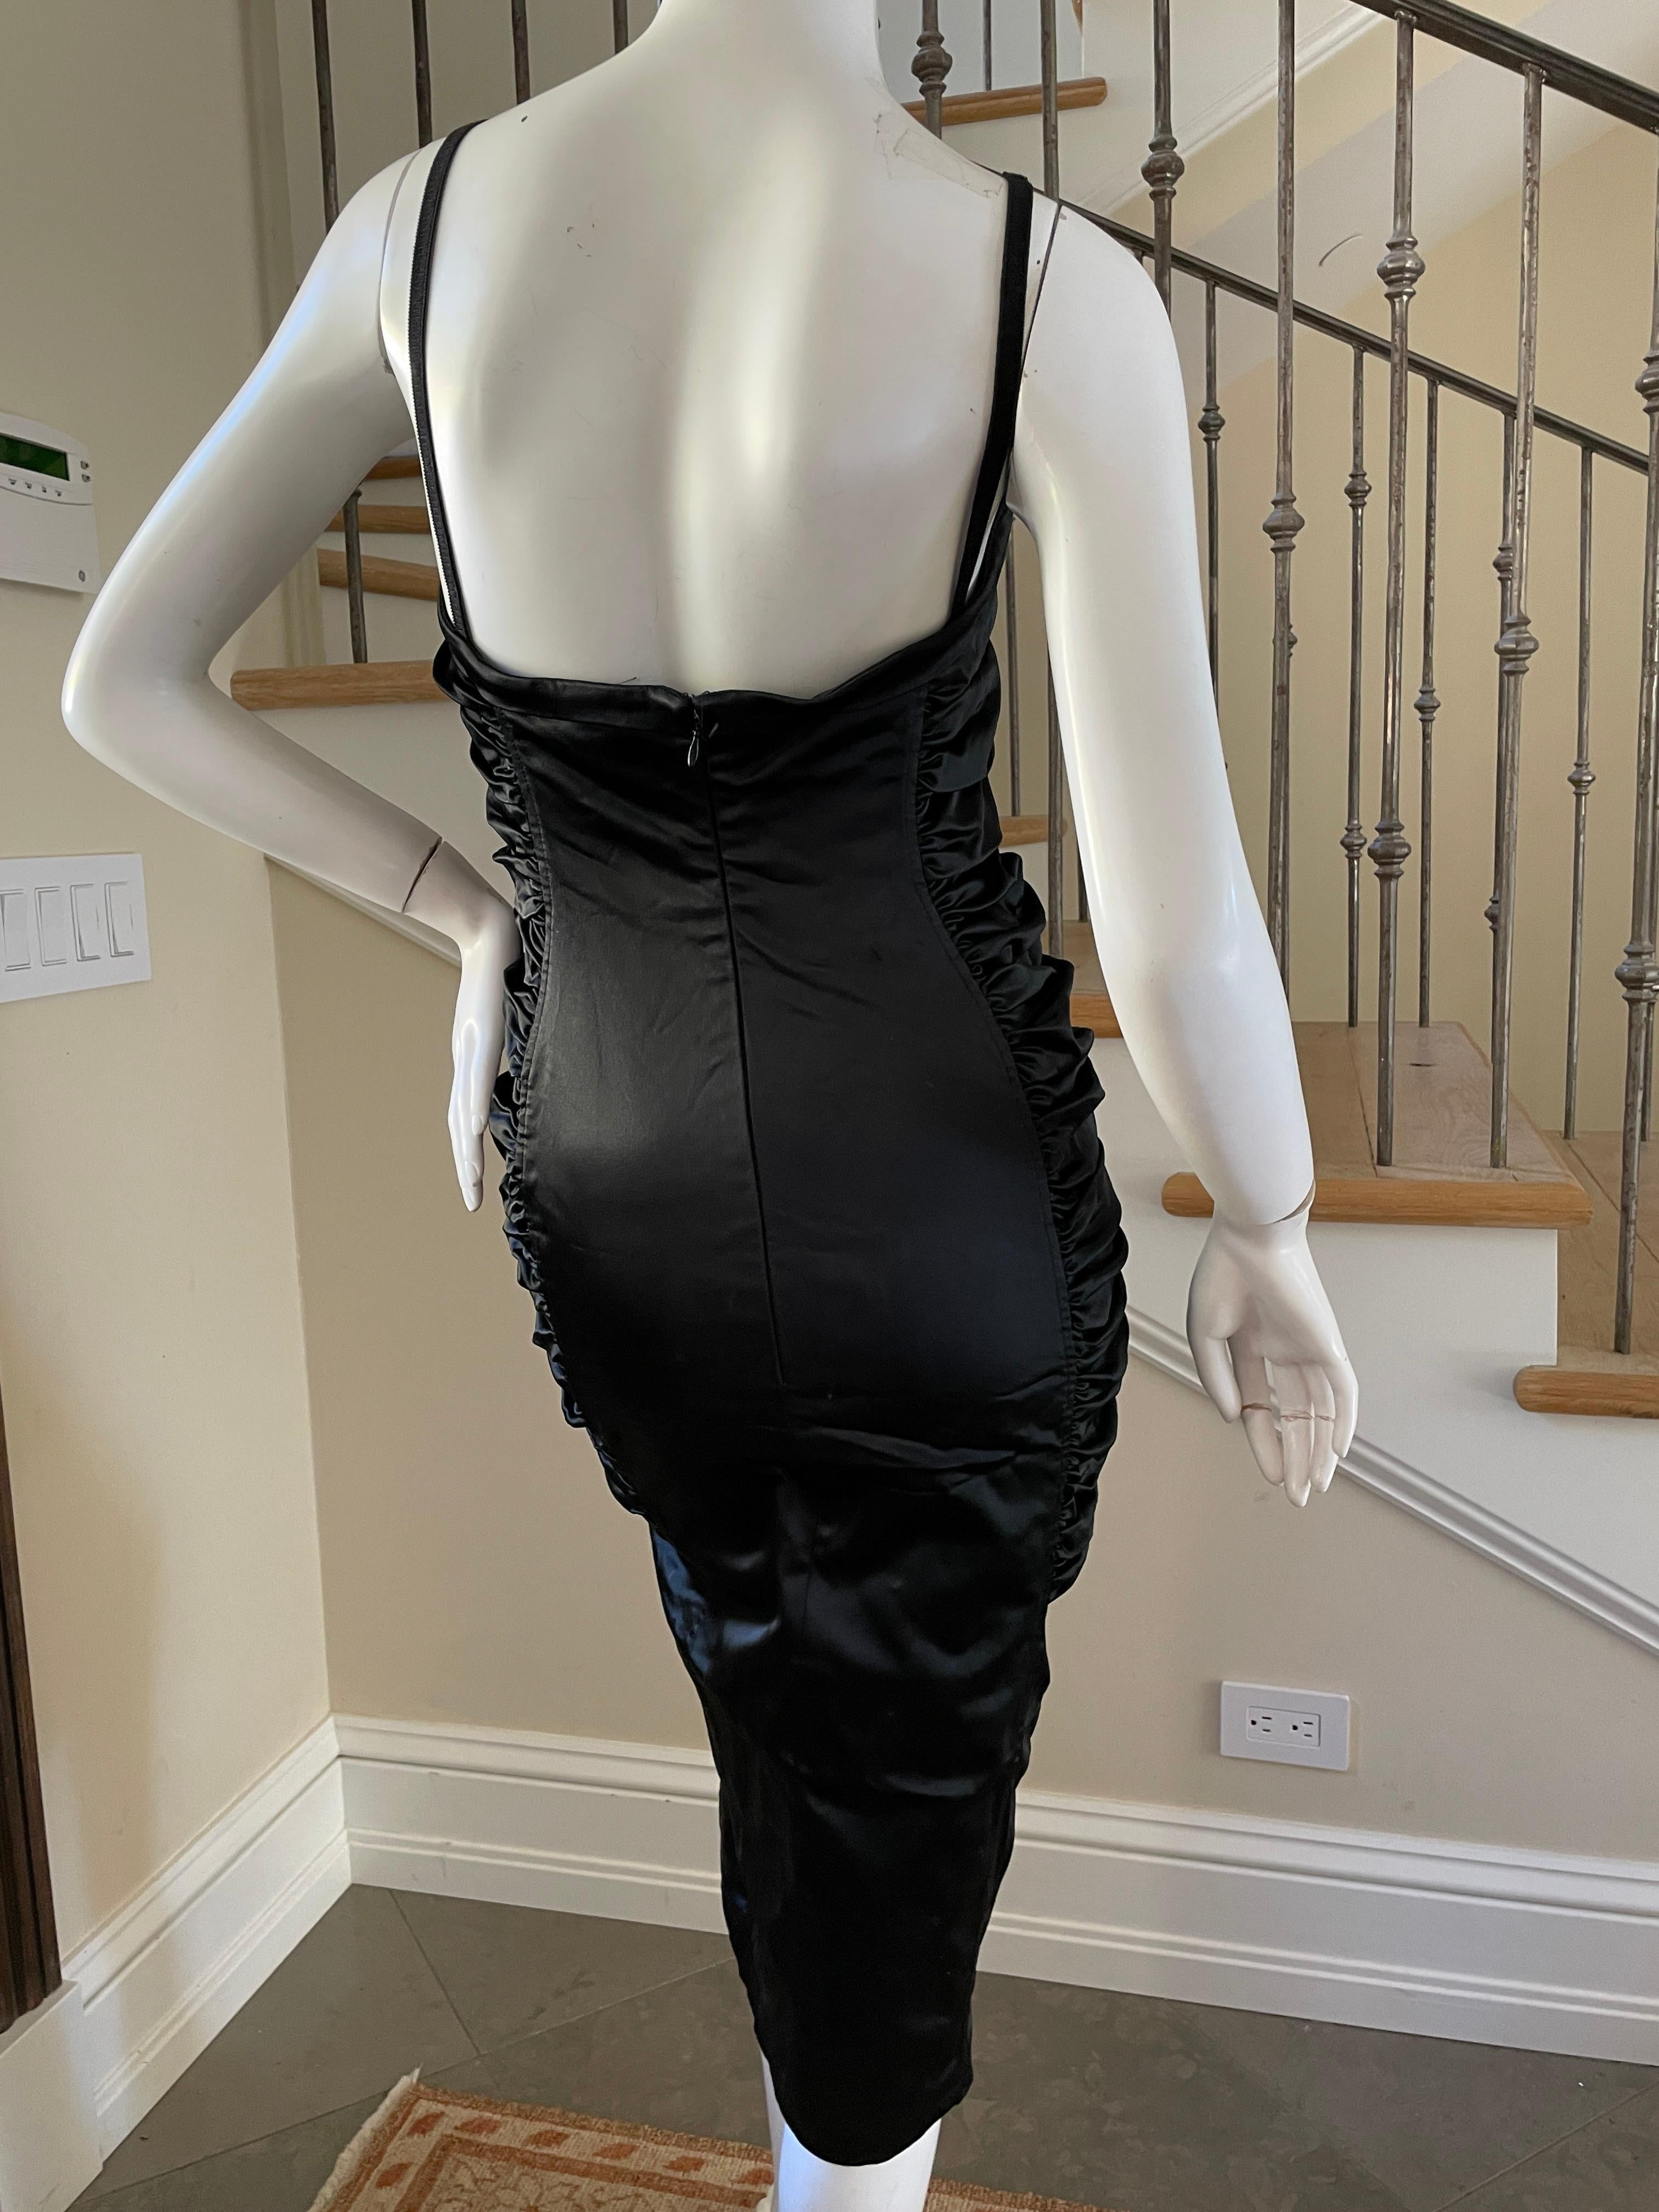 Women's D&G by Dolce & Gabbana Vintage Black Ruched Cocktail Dress with Underwire Bra For Sale